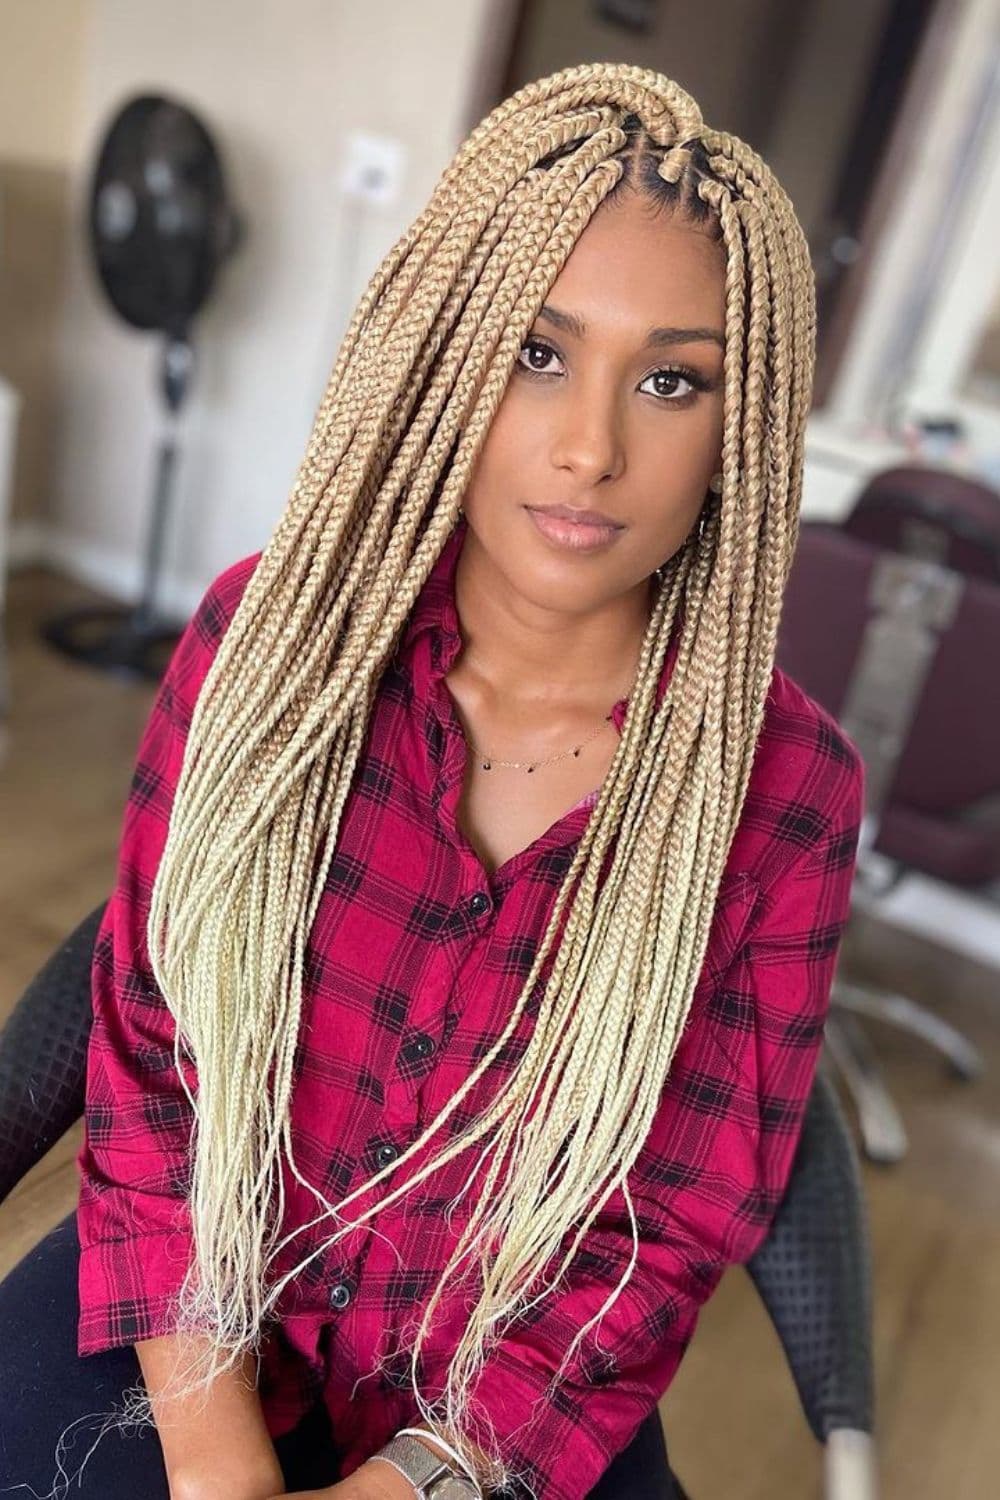 A woman wearing red plaid long sleeves with platinum blonde box braids.